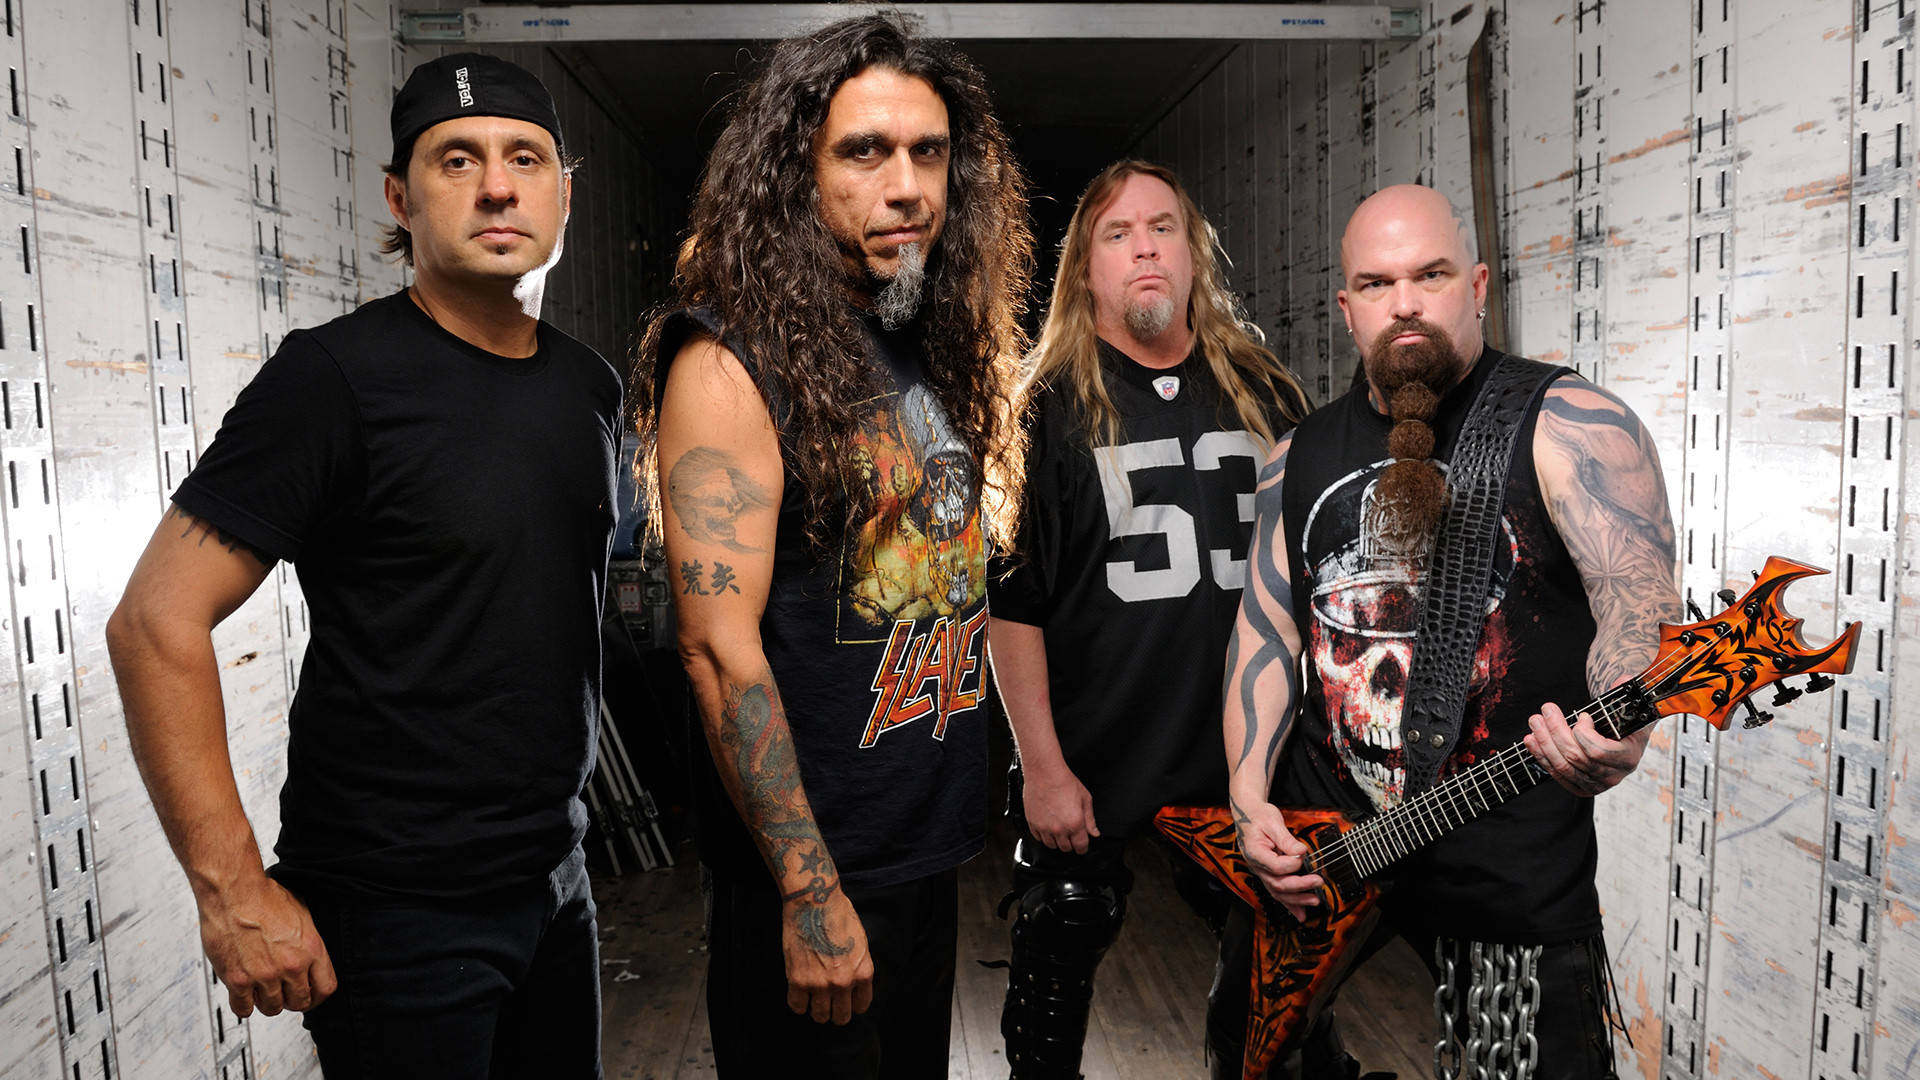 Free Slayer Wallpaper Downloads, [100+] Slayer Wallpapers for FREE |  